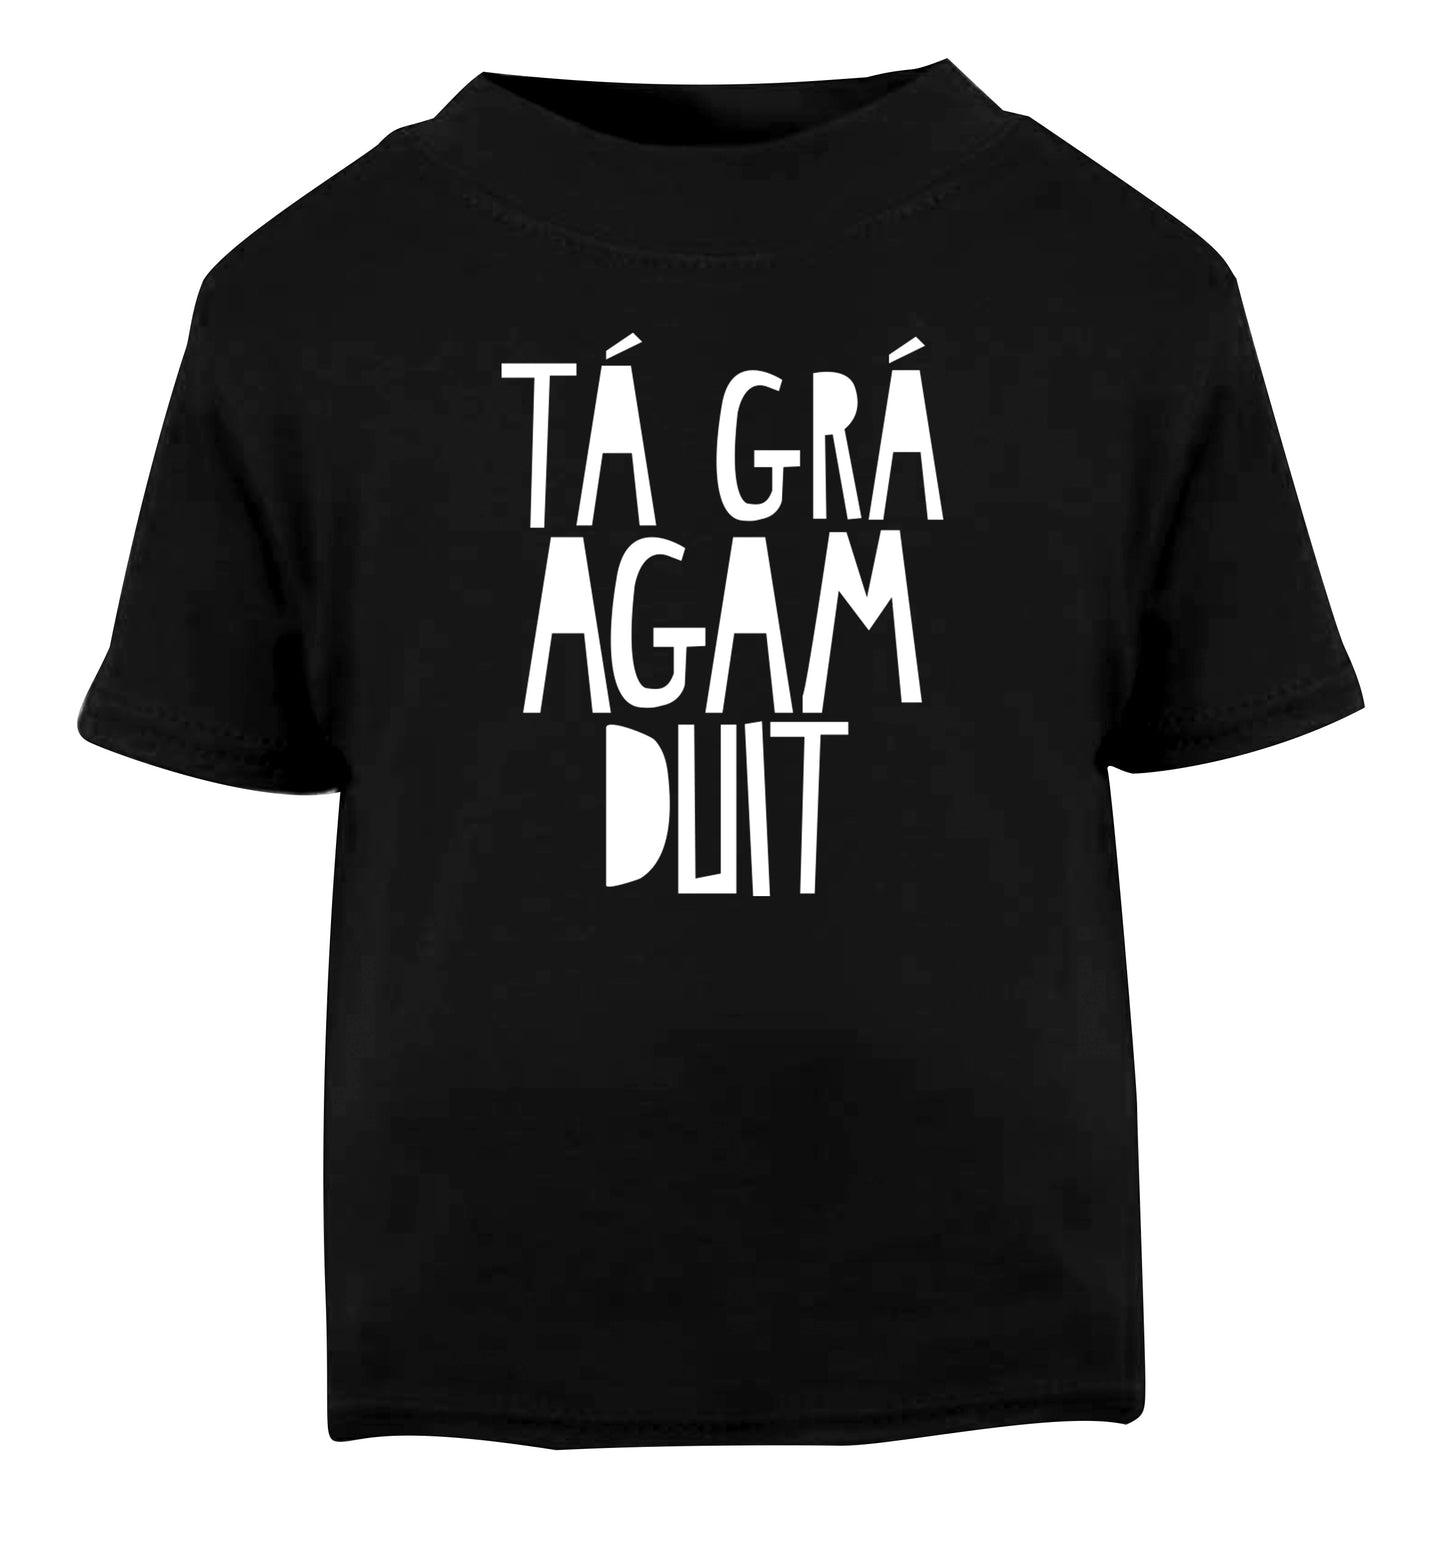 T‡ gr‡ agam duit - I love you Black Baby Toddler Tshirt 2 years